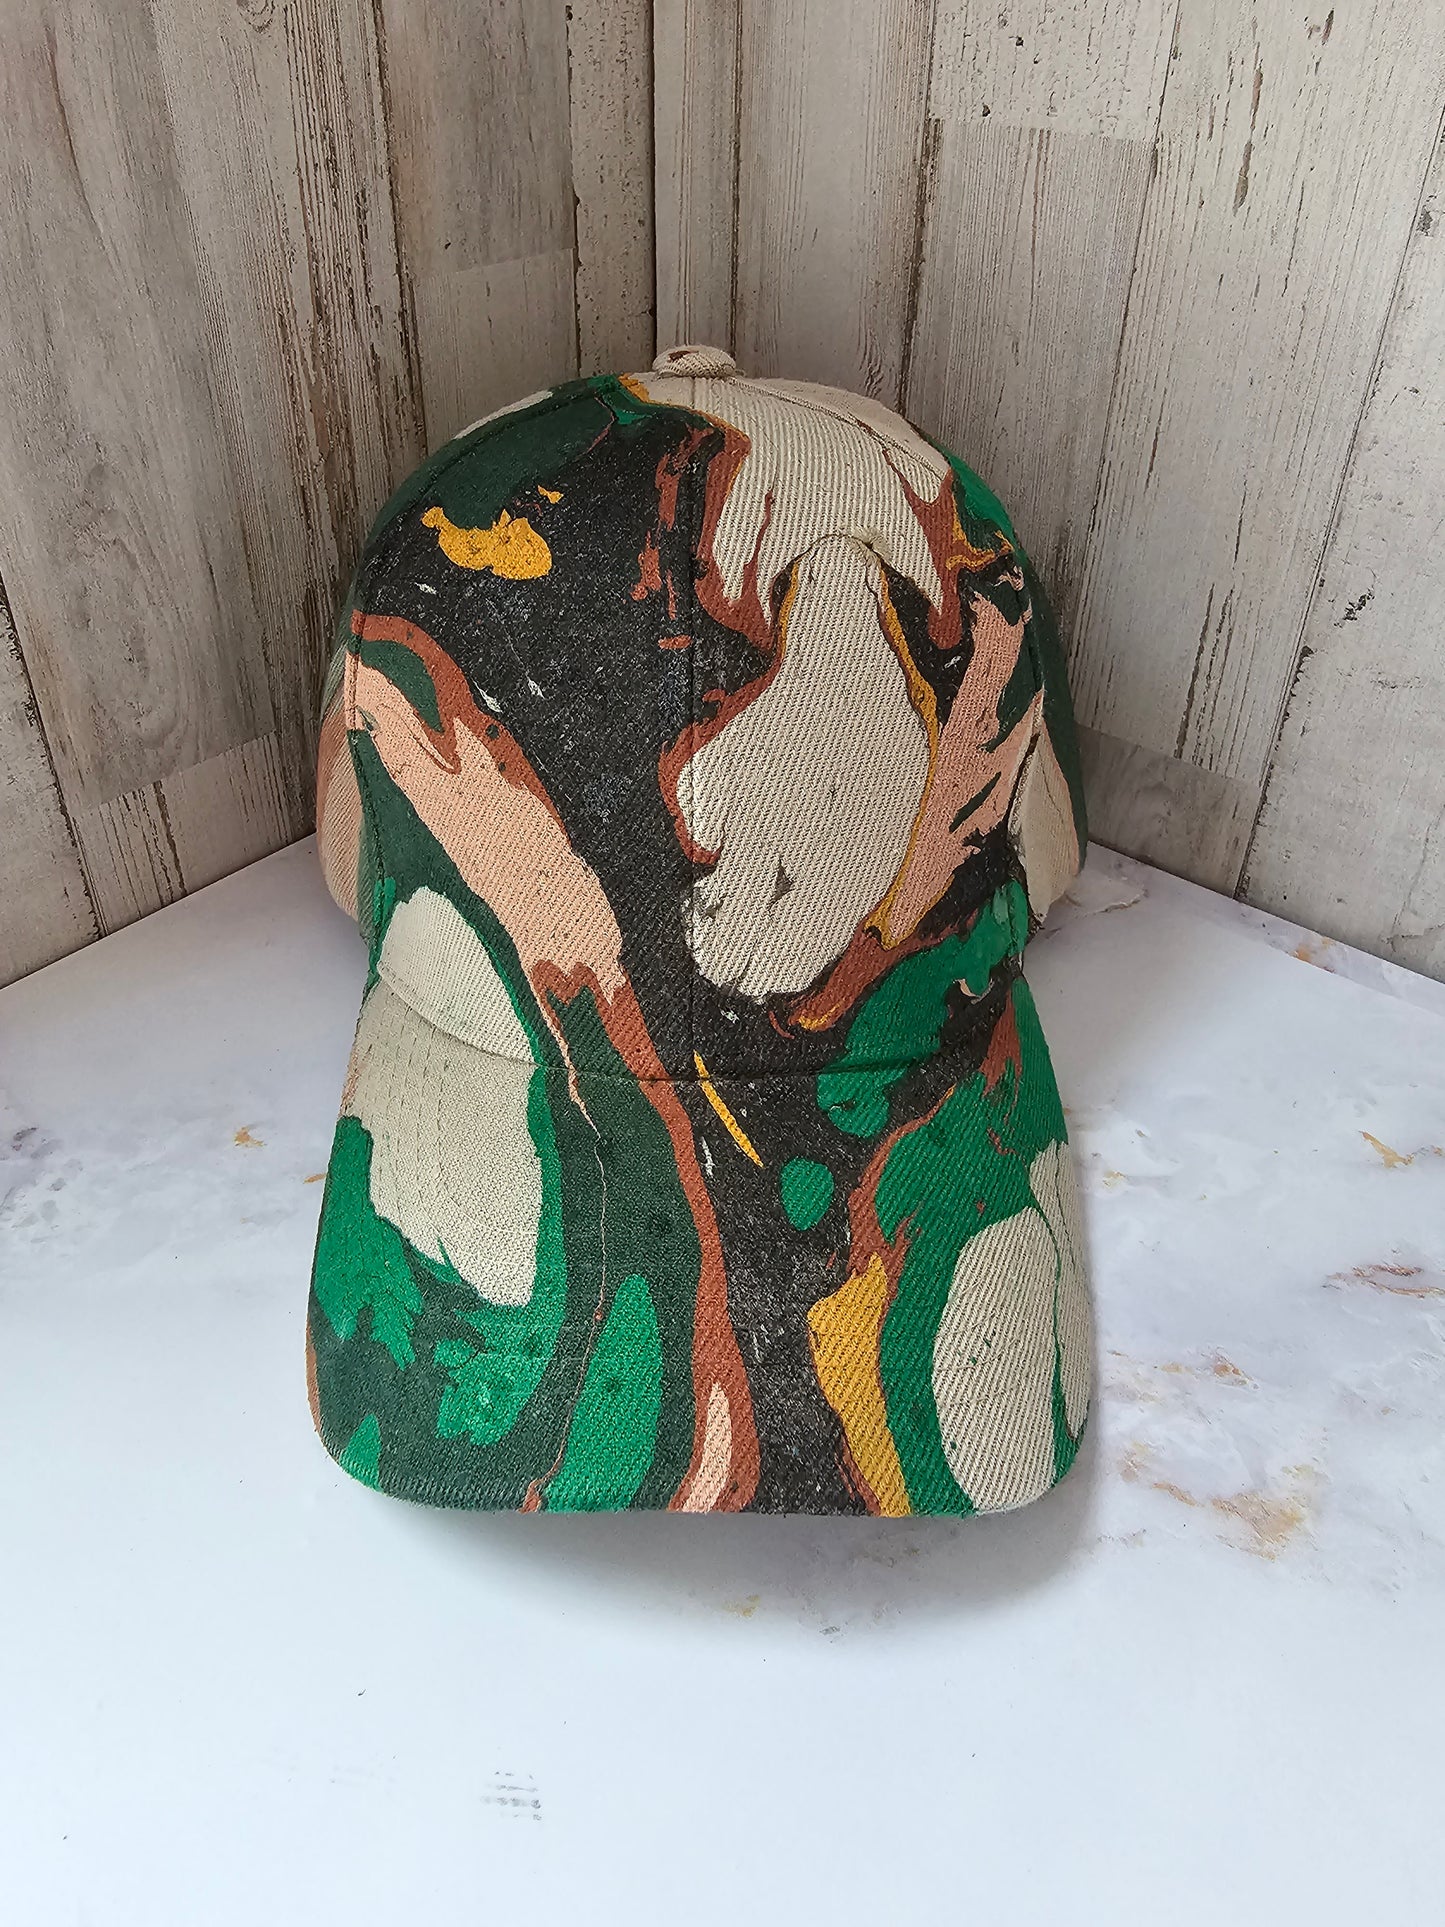 Hydrodipped Hats- Ready To Ship!